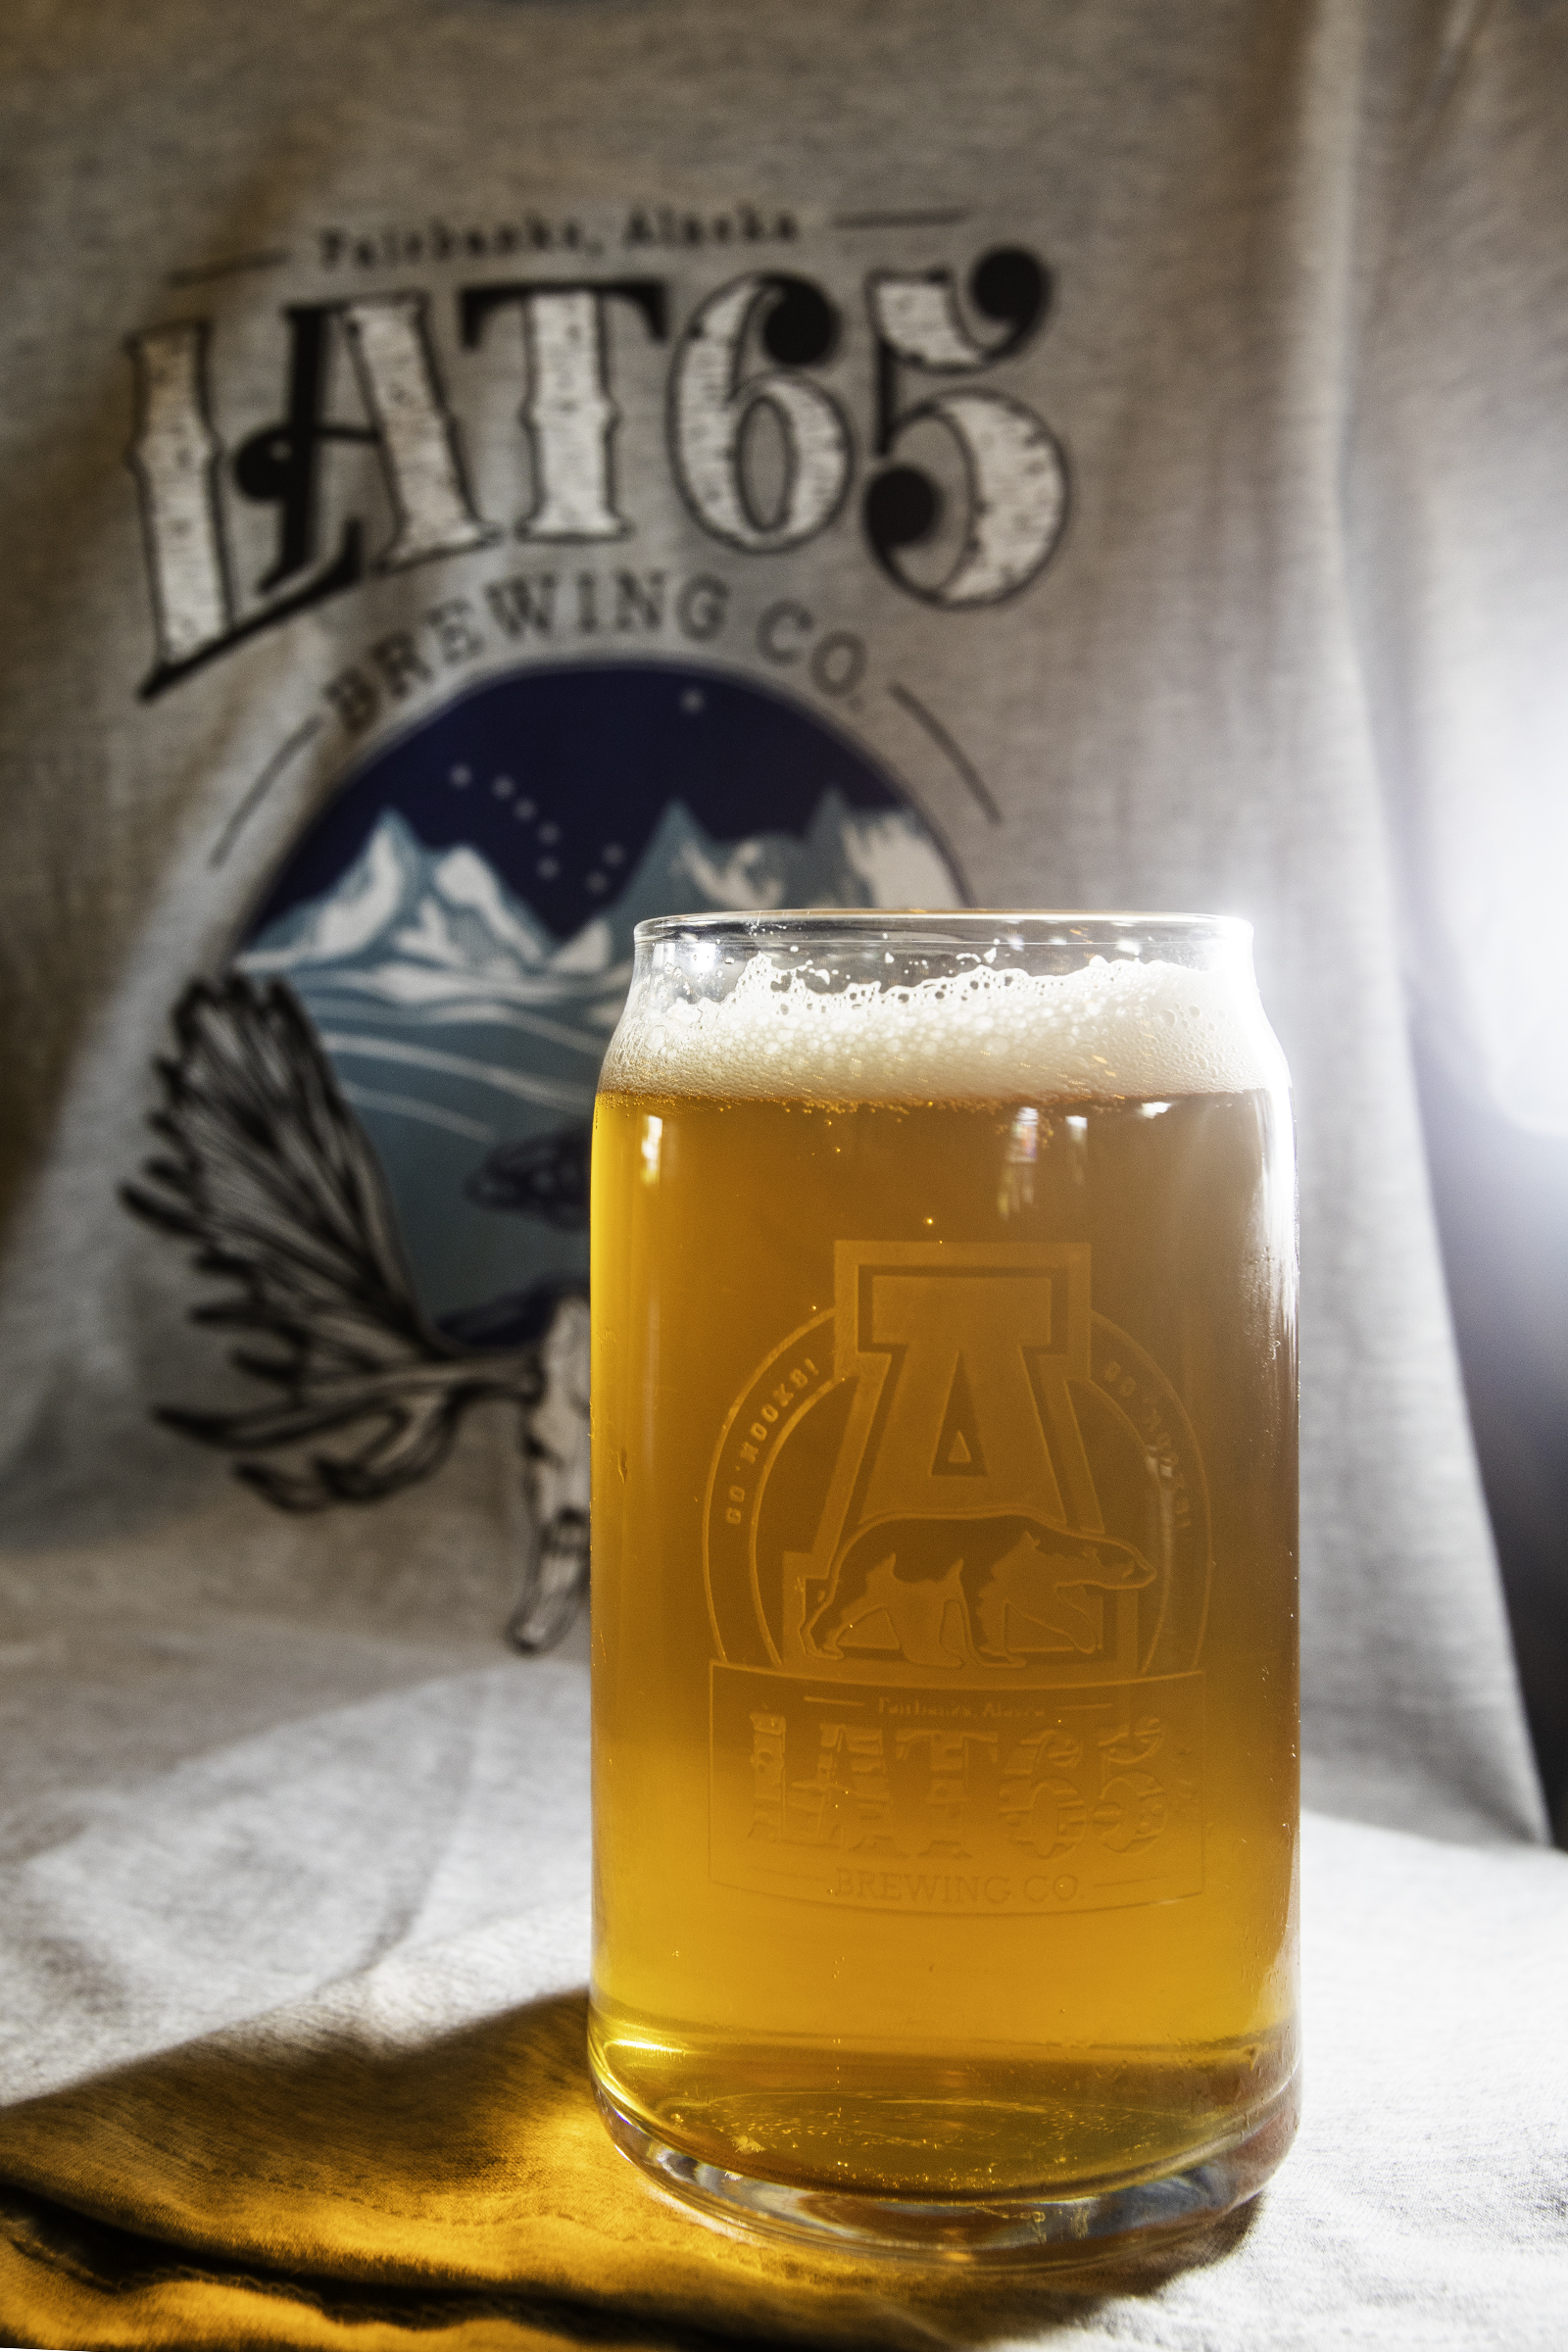 A glass of golden beer in front of a gray shirt with a brewery logo on it.